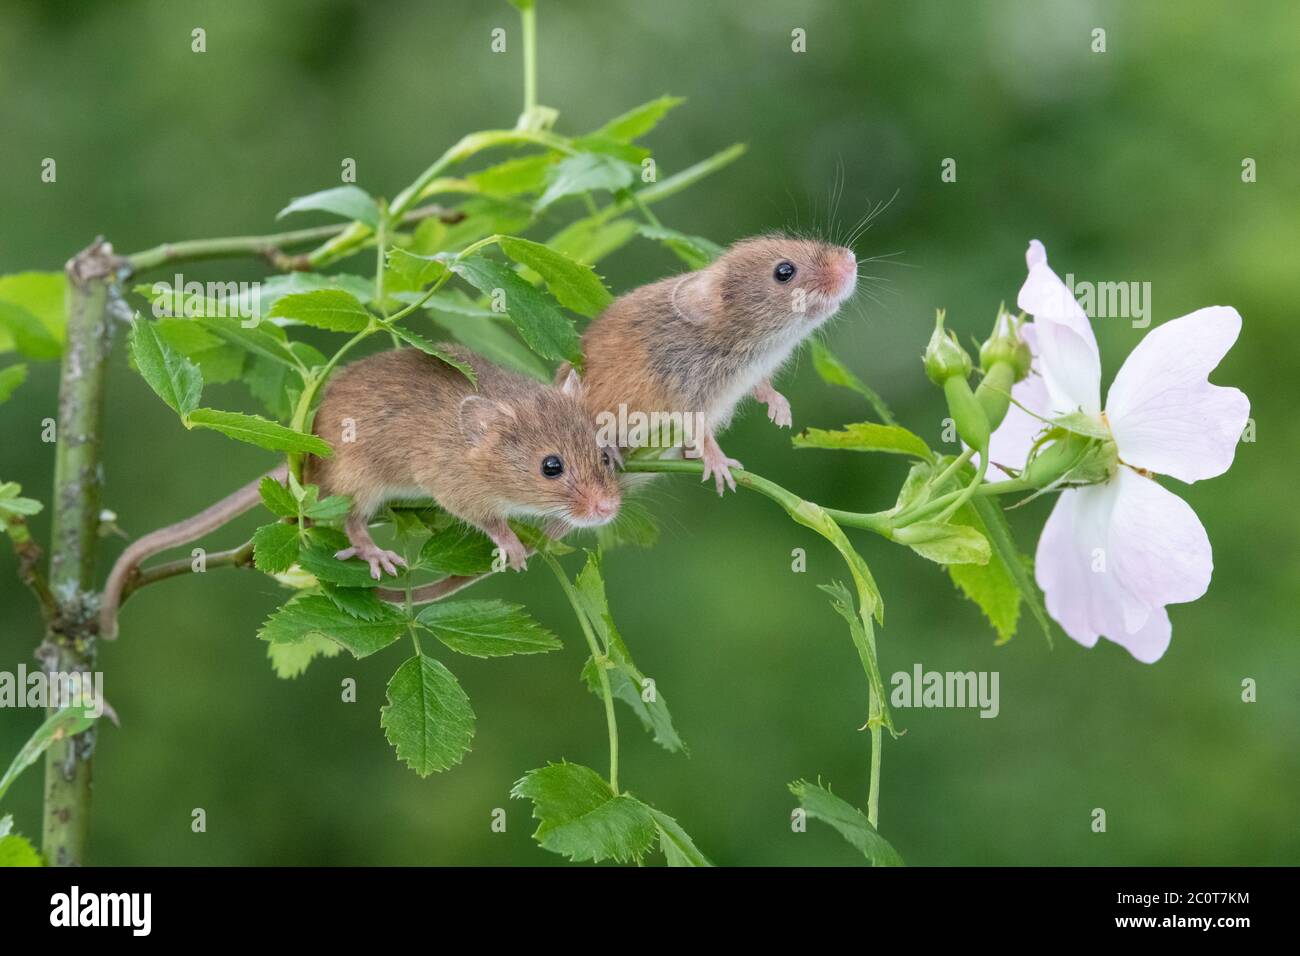 Two cute harvest mice sitting like friends on a branch of dog-rose Stock Photo